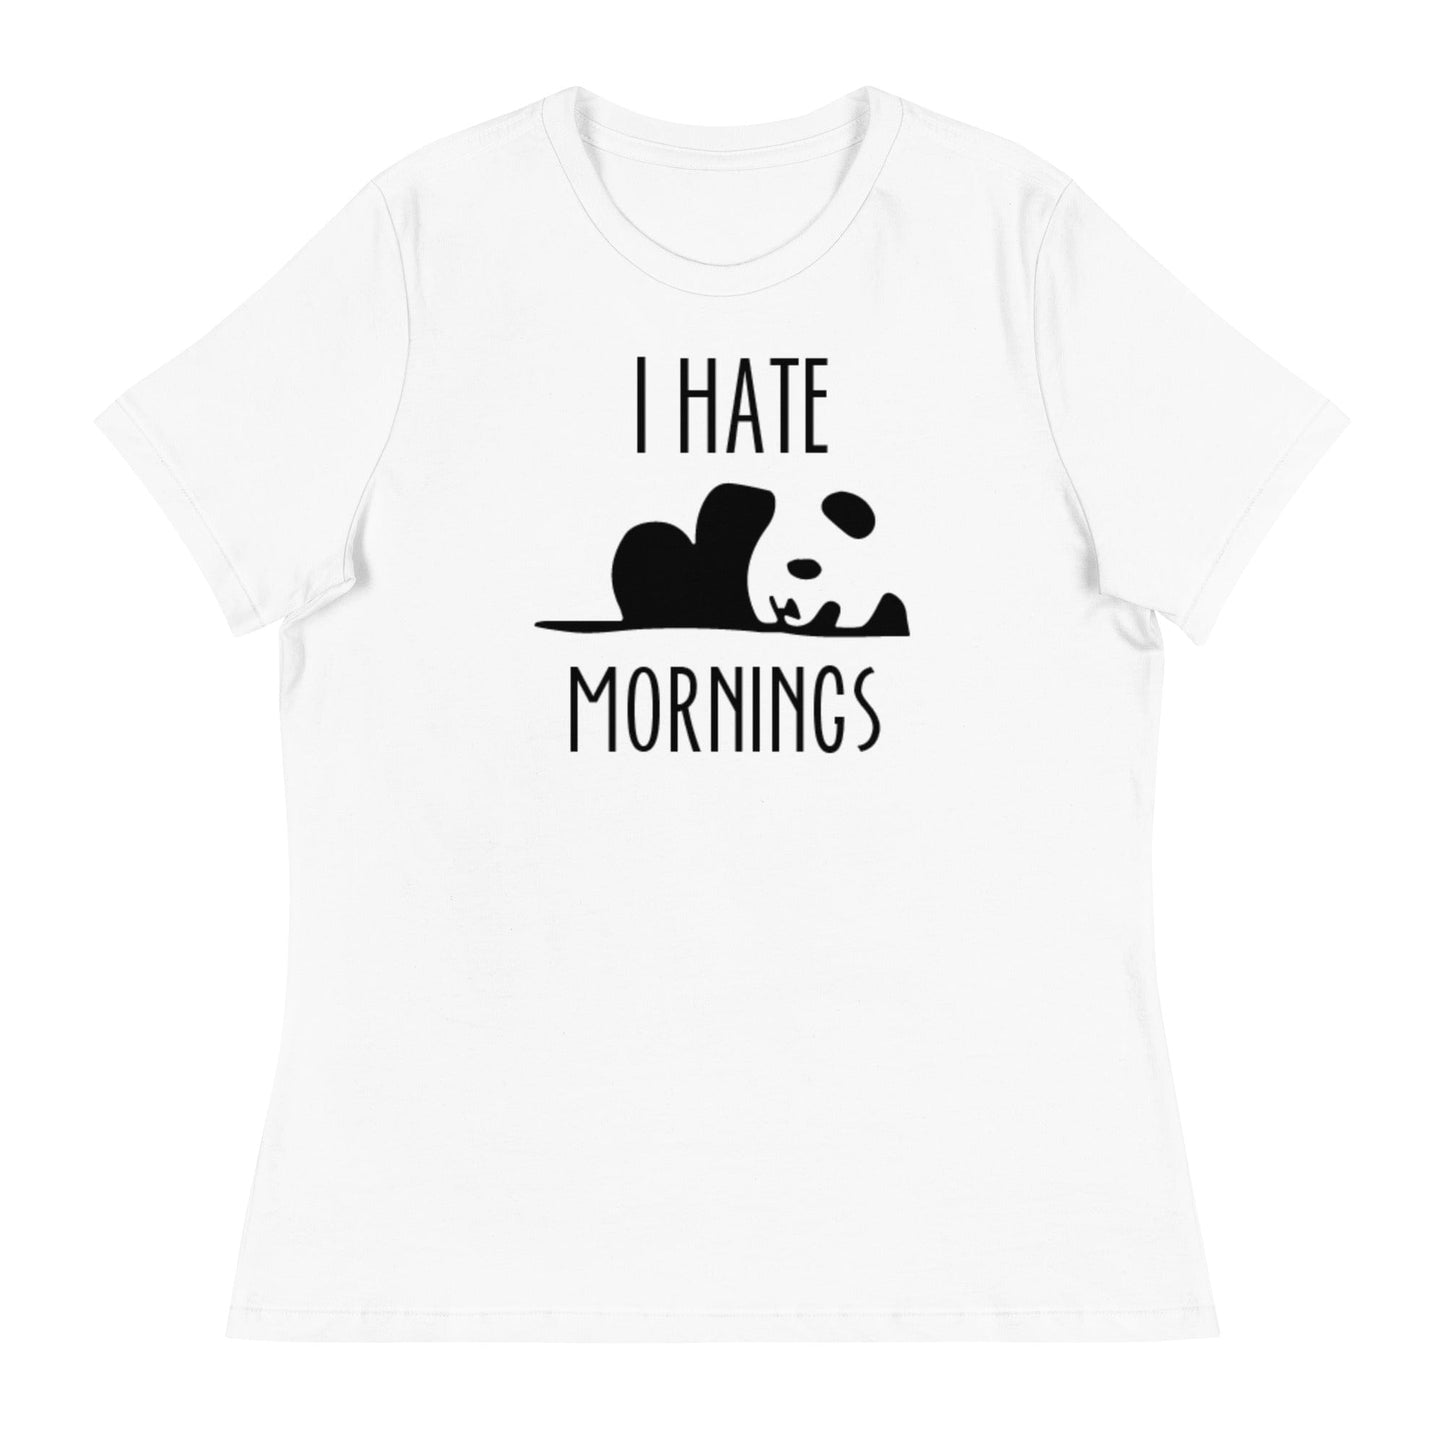 I HATE MORNINGS Relaxed Tee